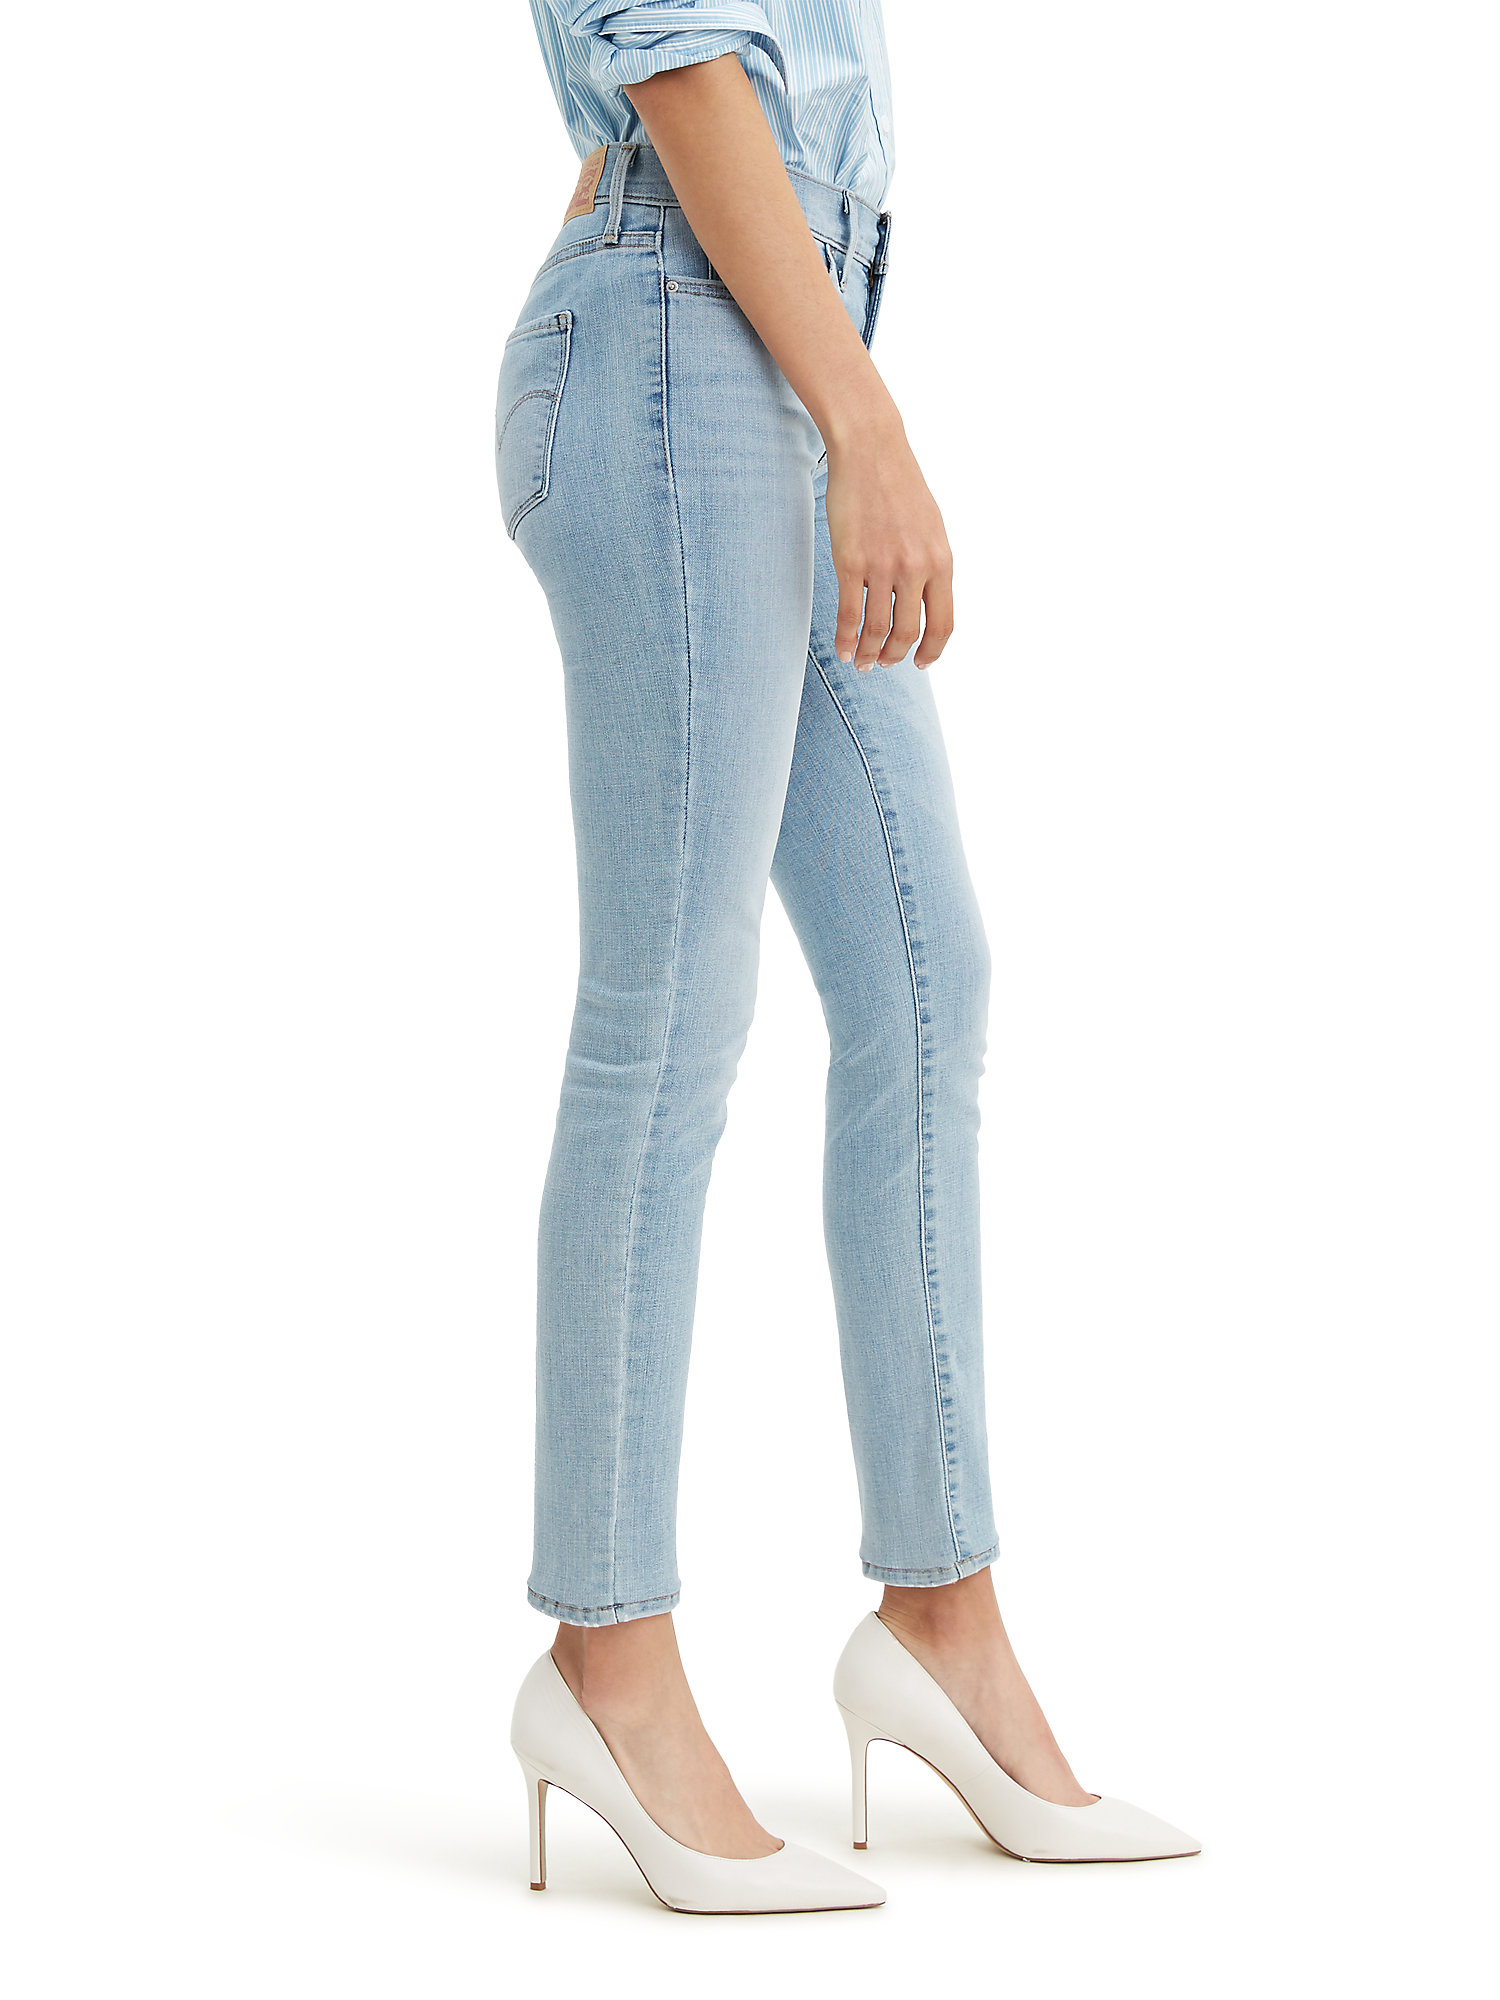 Levi’s Original Red Tab Women's 311 Shaping Skinny Jeans - image 5 of 6